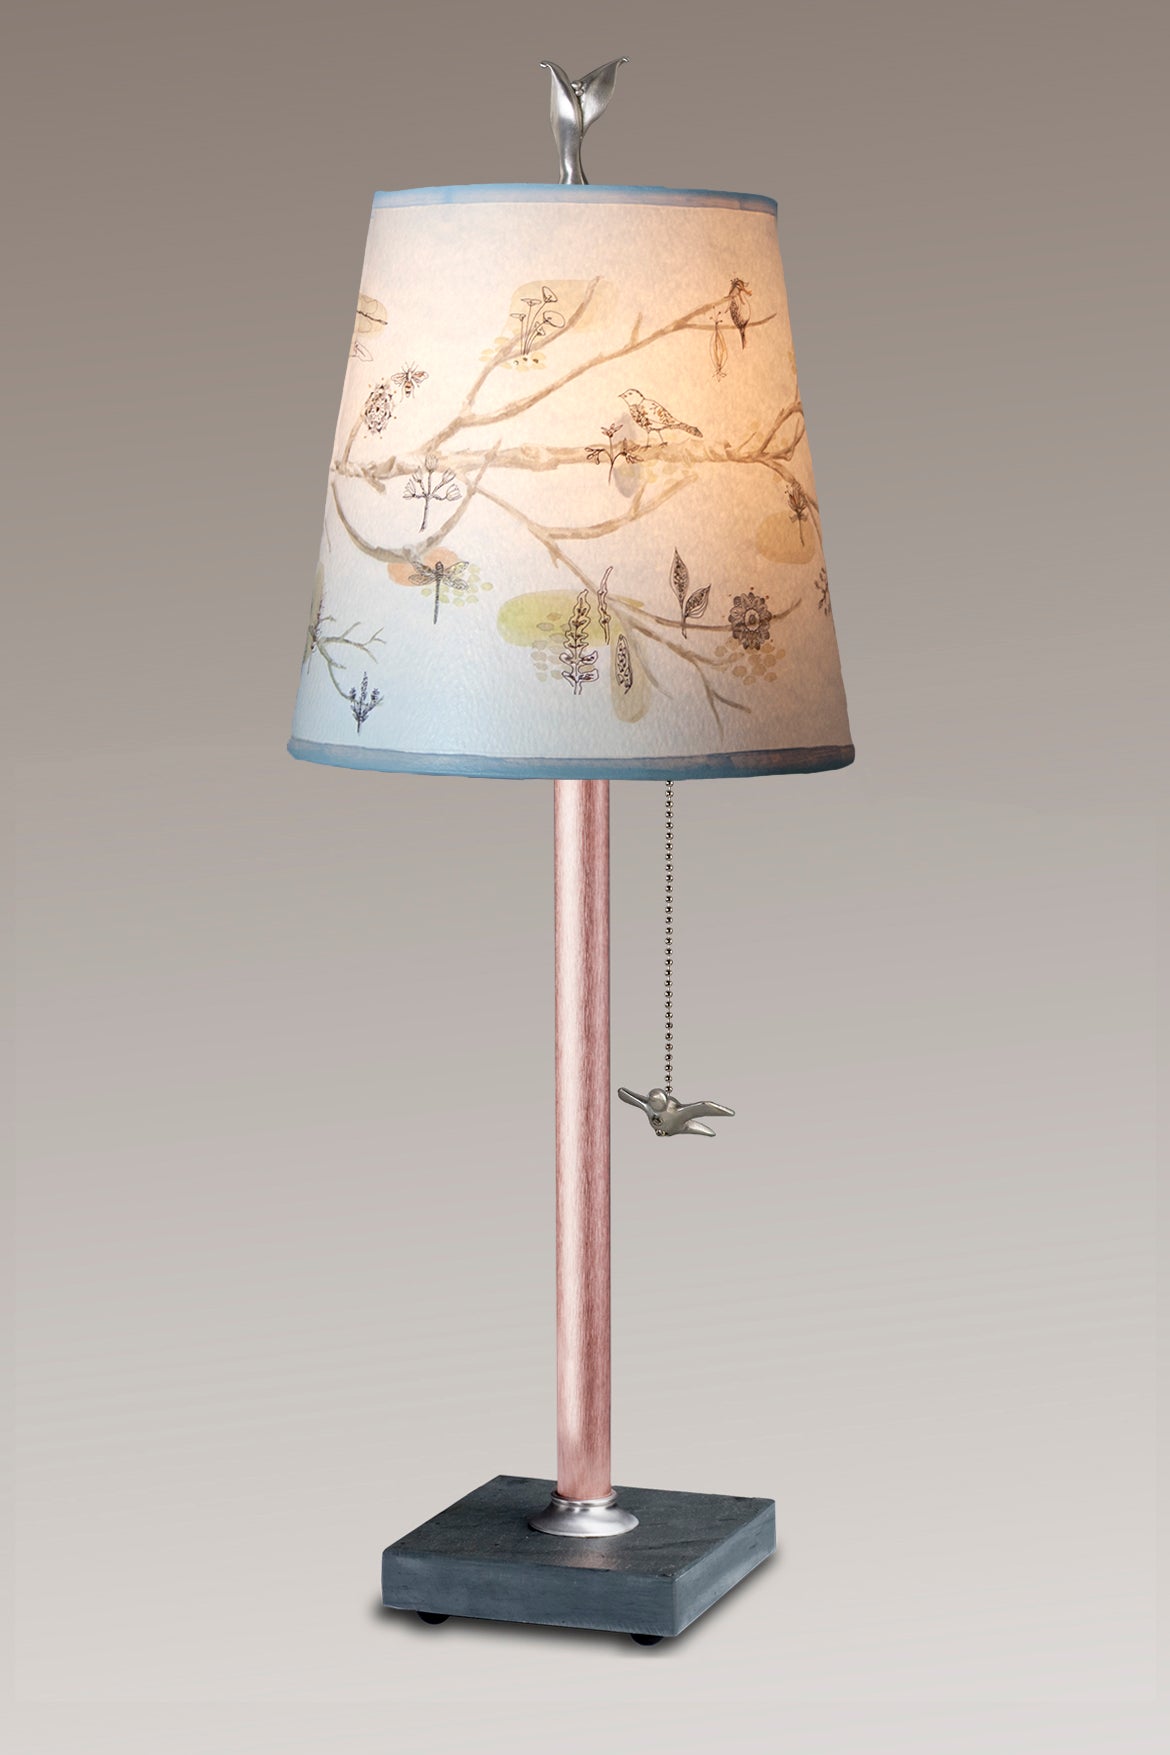 Copper Table Lamp with Small Drum Shade in Artful Branch